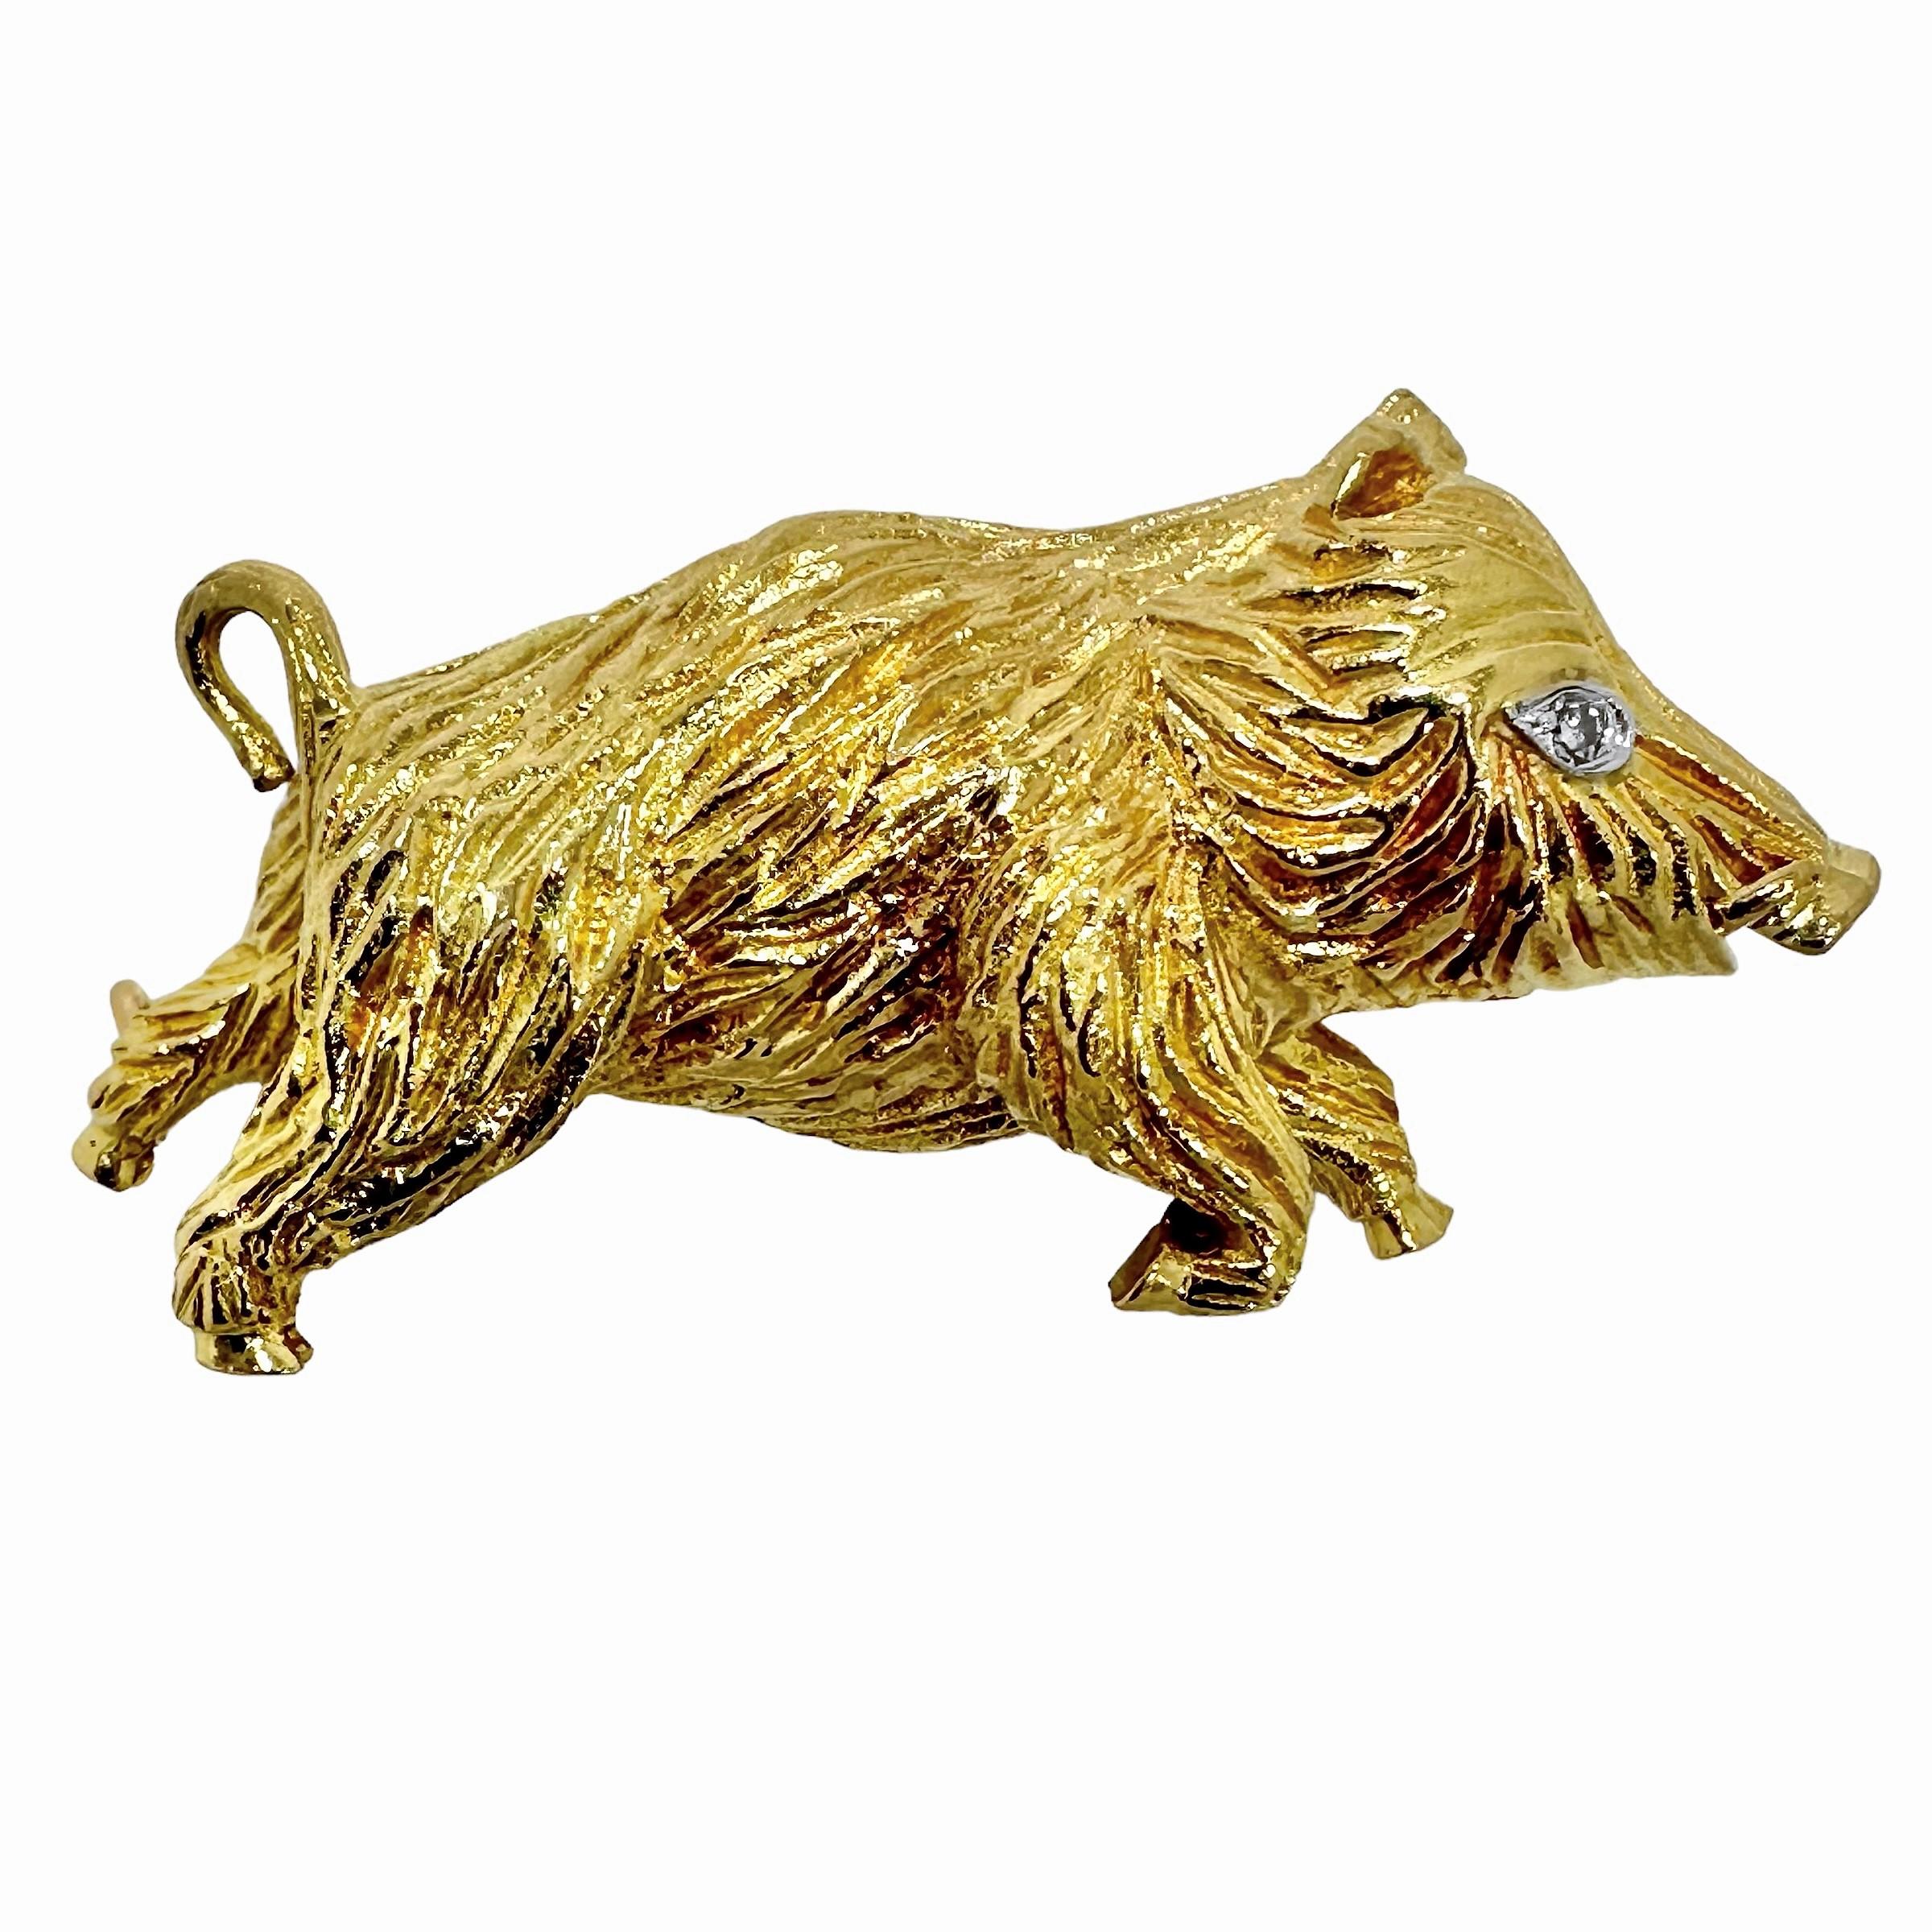 This fanciful Mid-20th Century French creation would really look right at home on a stylish lapel or in a lush forest. It was crafted so as to be so lifelike that one would almost expect it to get up and run away. Deep texture over its entire 18k